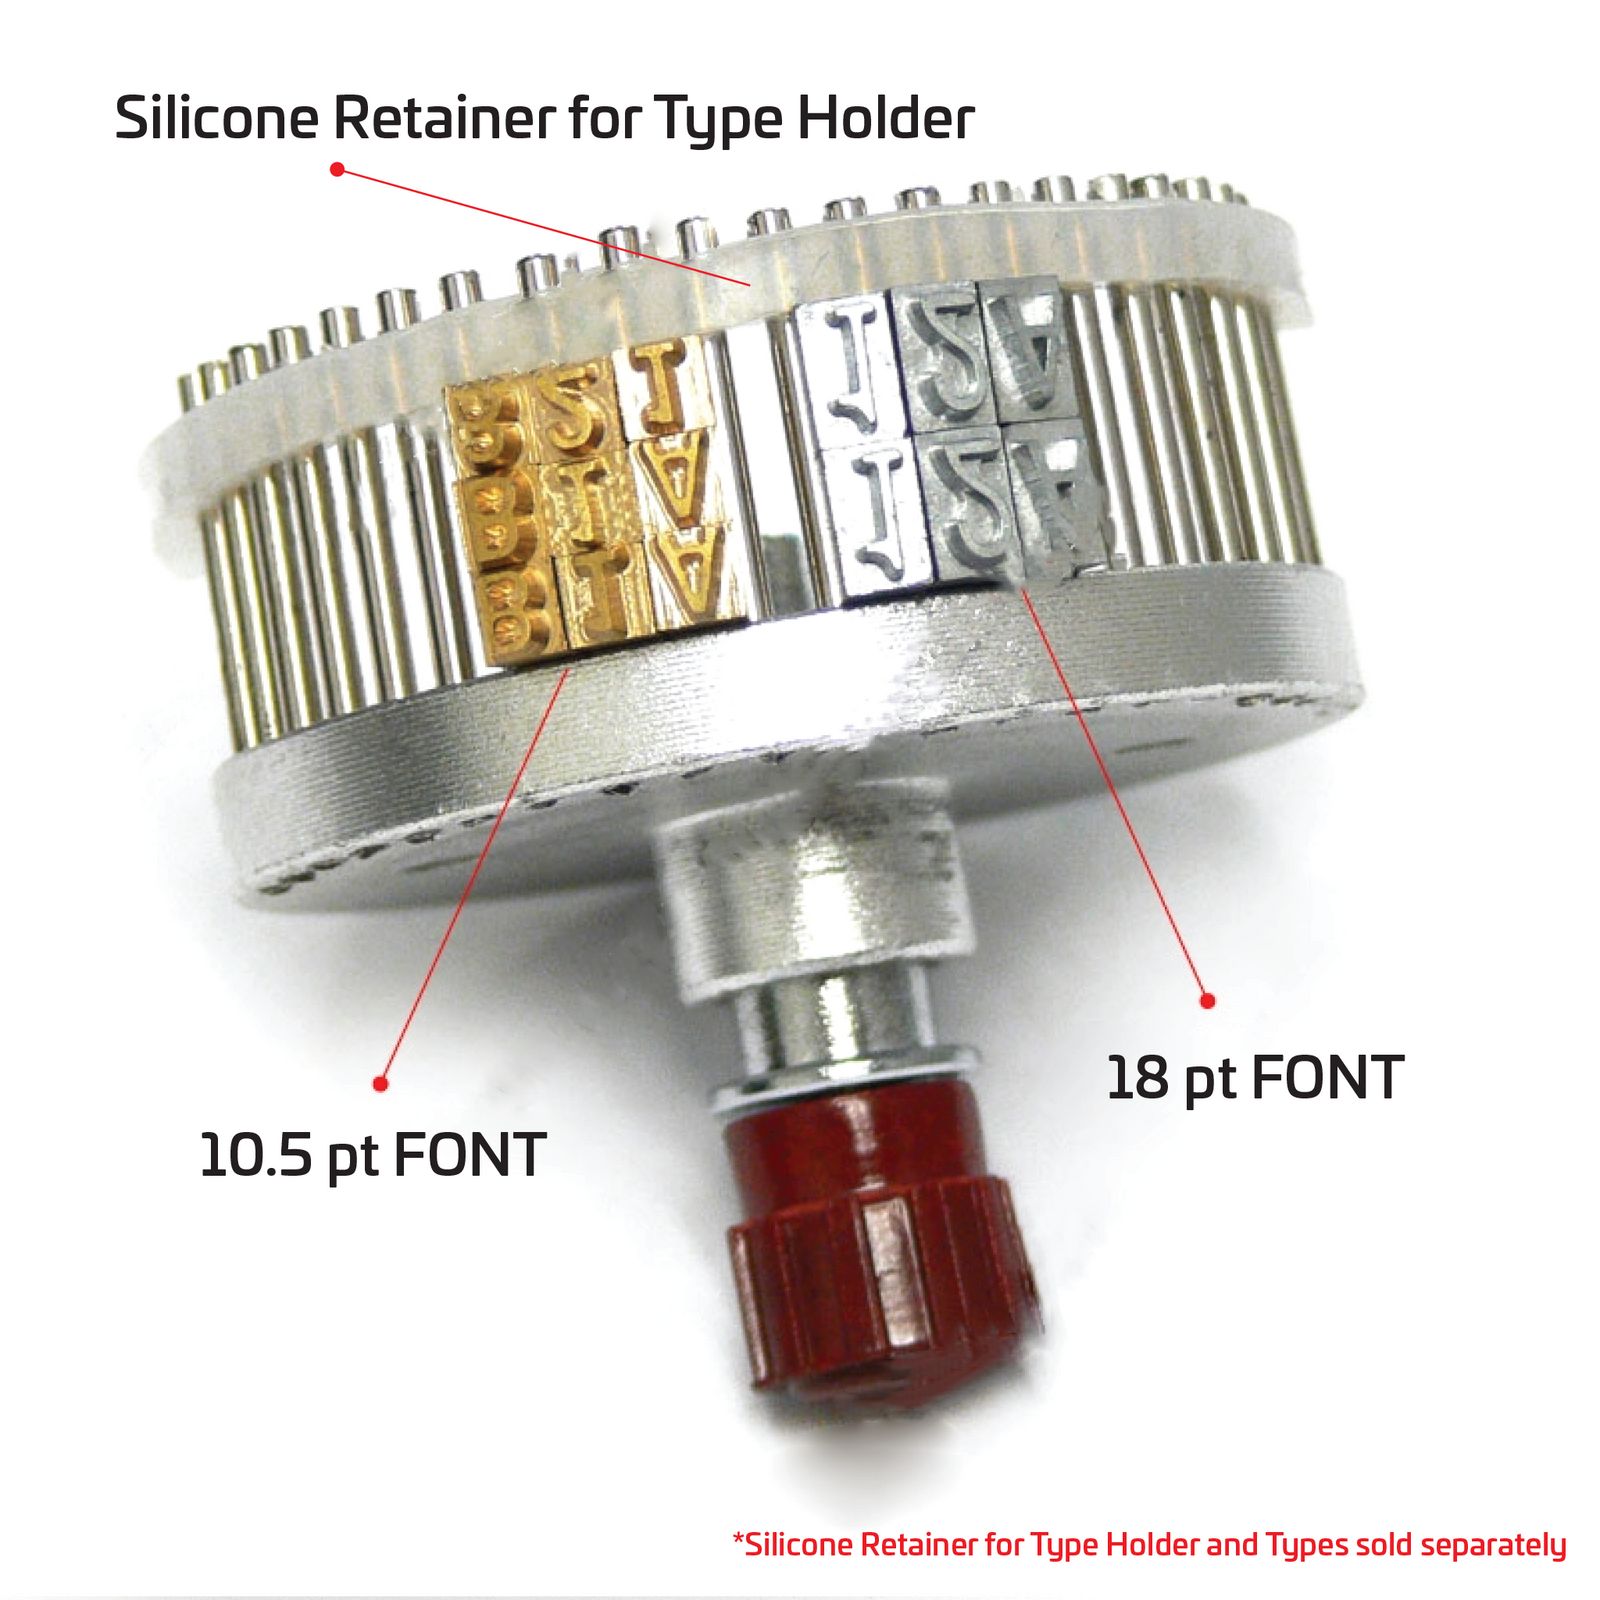 Type holder for hot ink roll printing and types compatible with the JORES TECHNOLOGIES® continuous Band sealer with coder. Text shows the size of fonts it can use are: 10.5 pt and 18 pt. It is also shown where the silicone retainer is placed and it states that retainer for type holder is sold separately